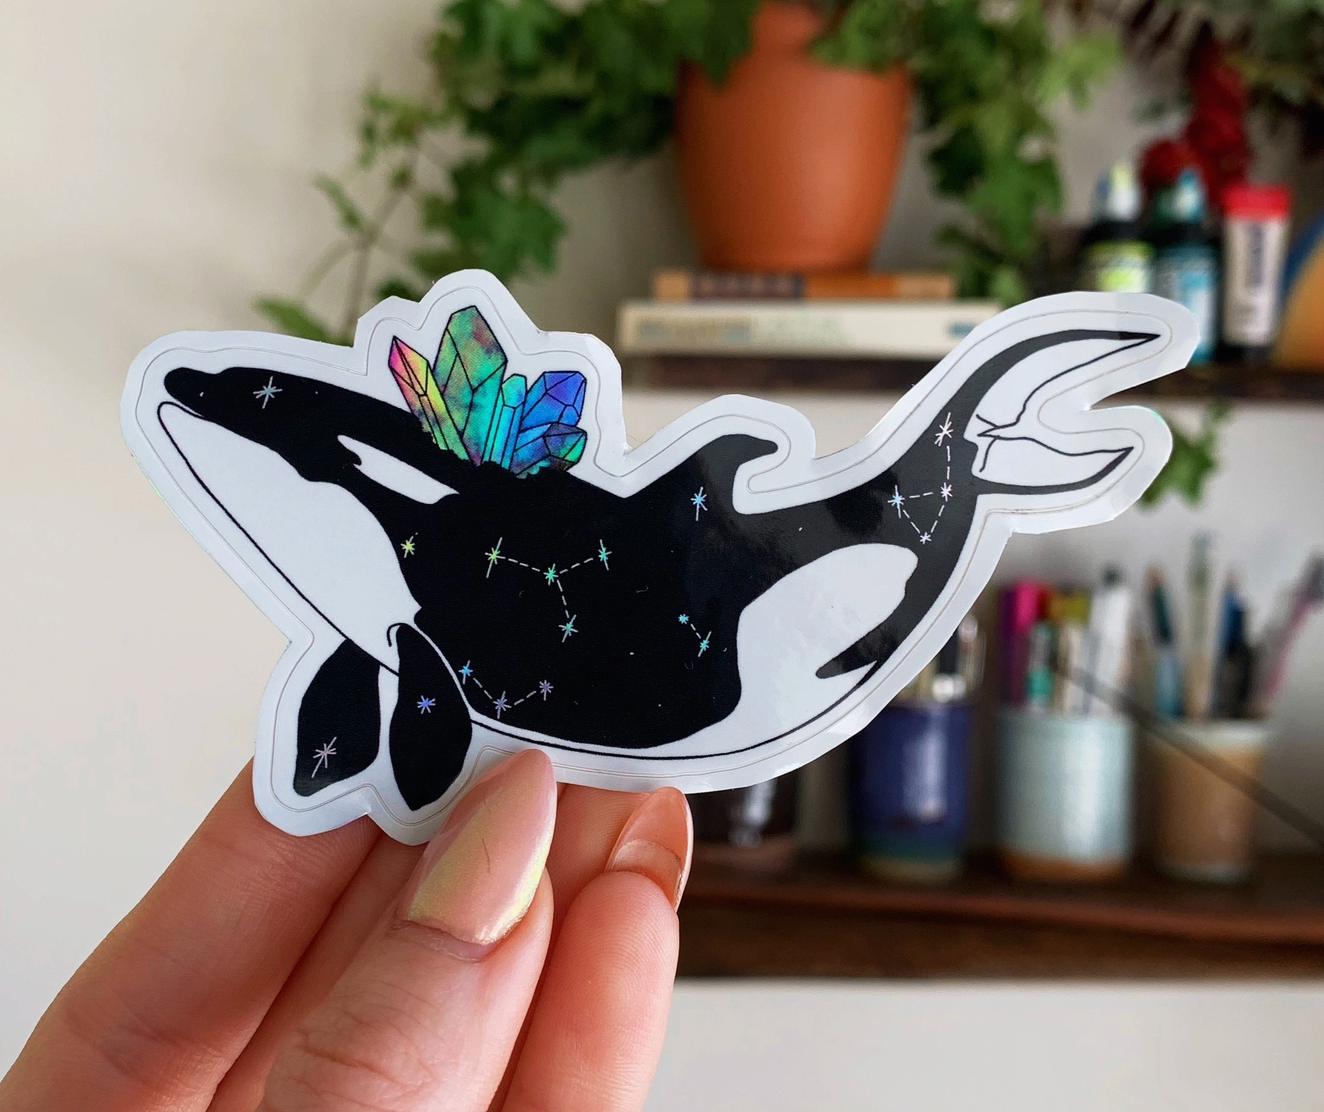 Orca Holographic Sticker